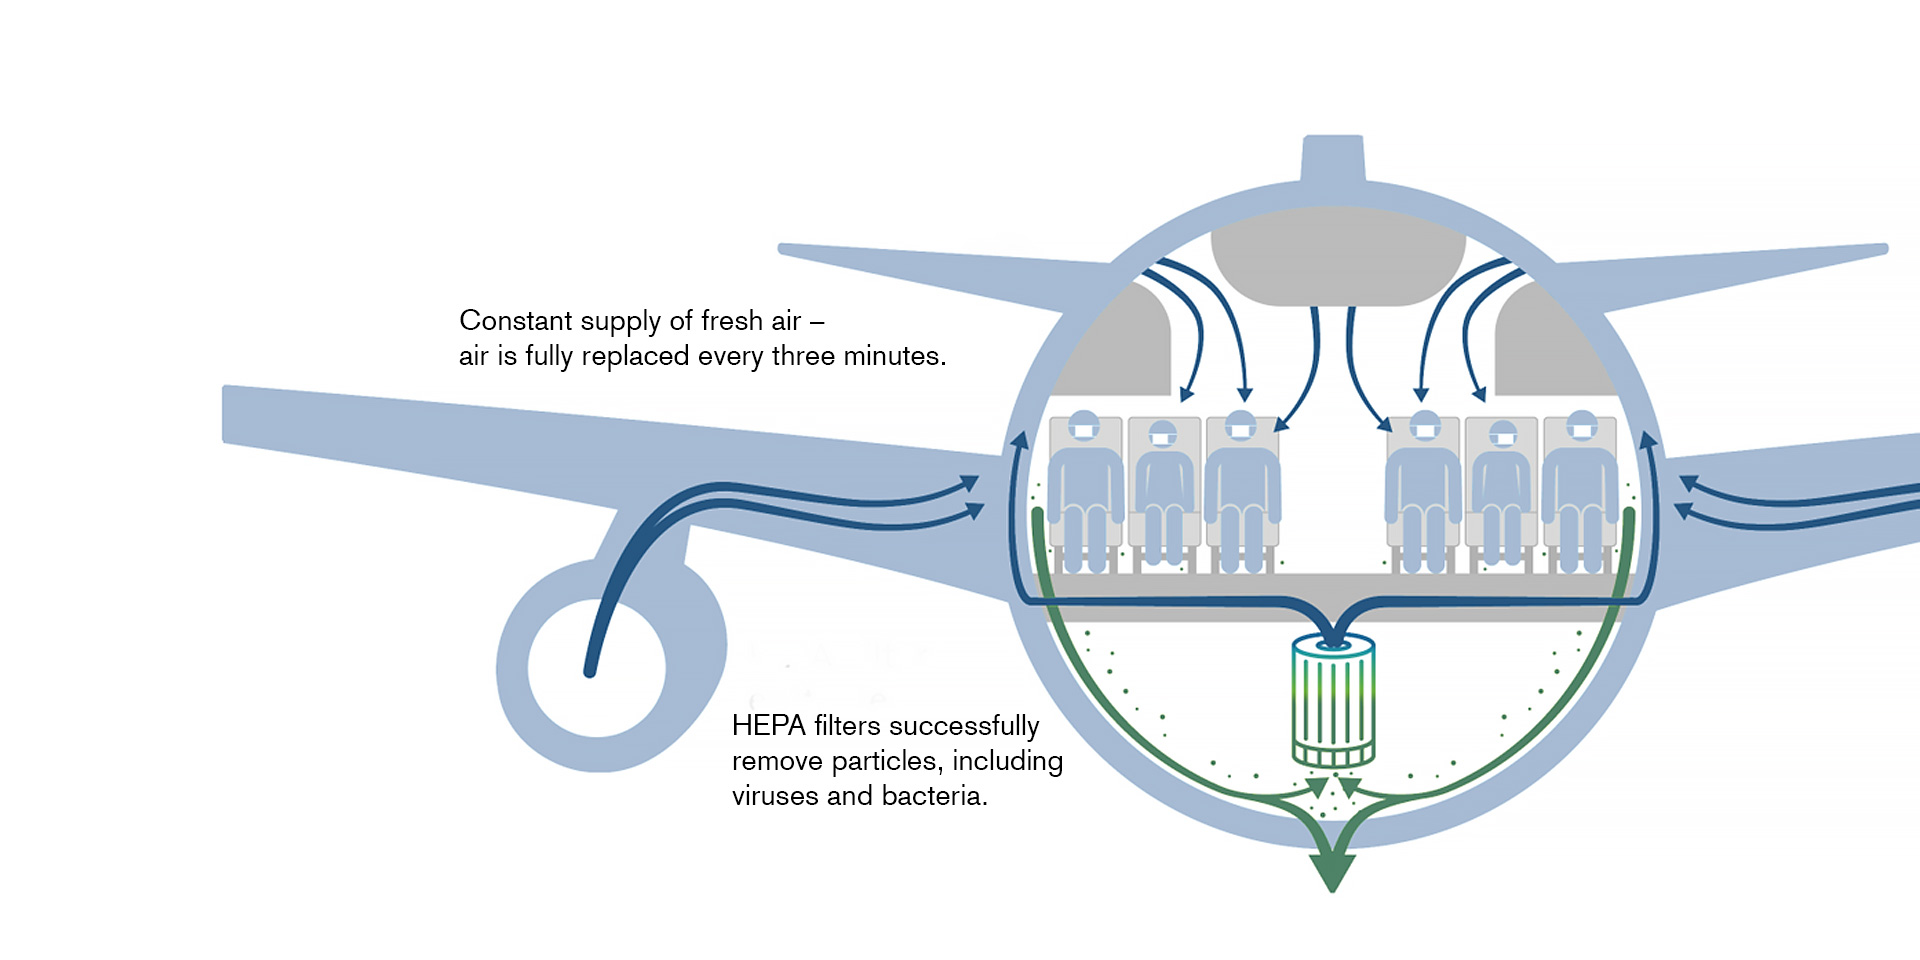 How air circulates within an aircraft. Constant supply of fresh air – air is fully replaced every three minutes. HEPA filters successfully remove particles, including viruses and bacteria.